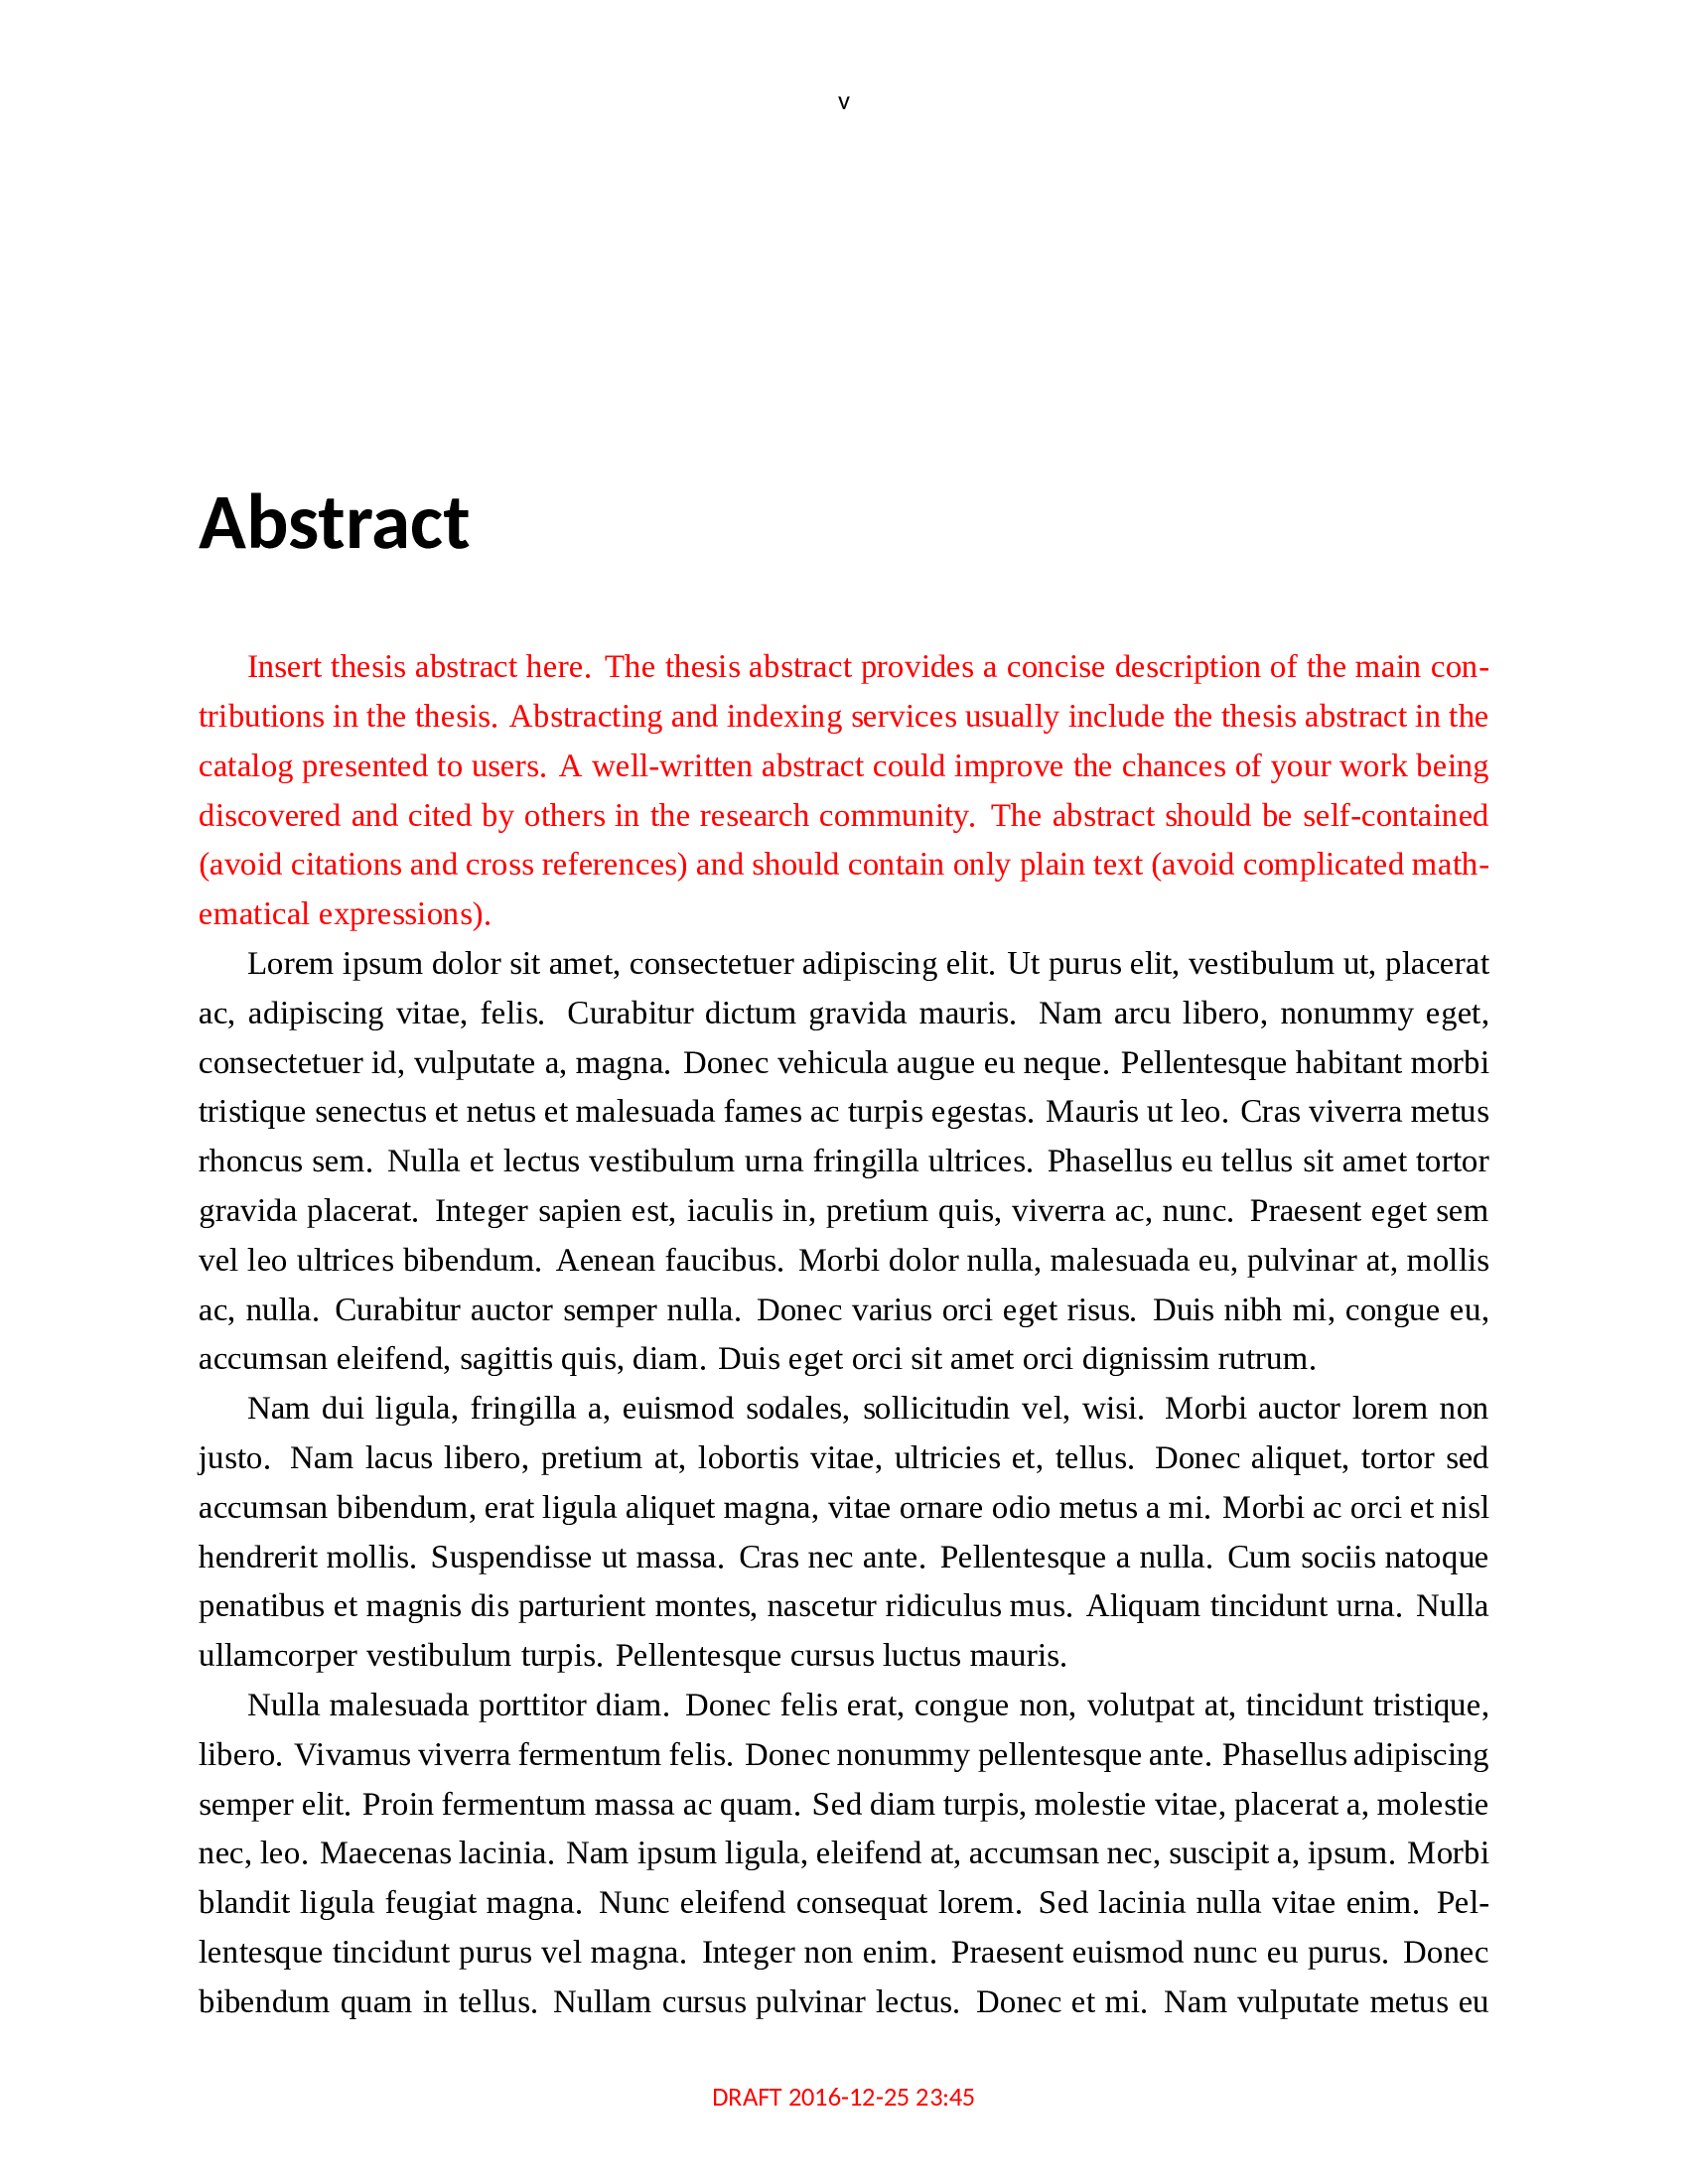 what should a thesis abstract contain